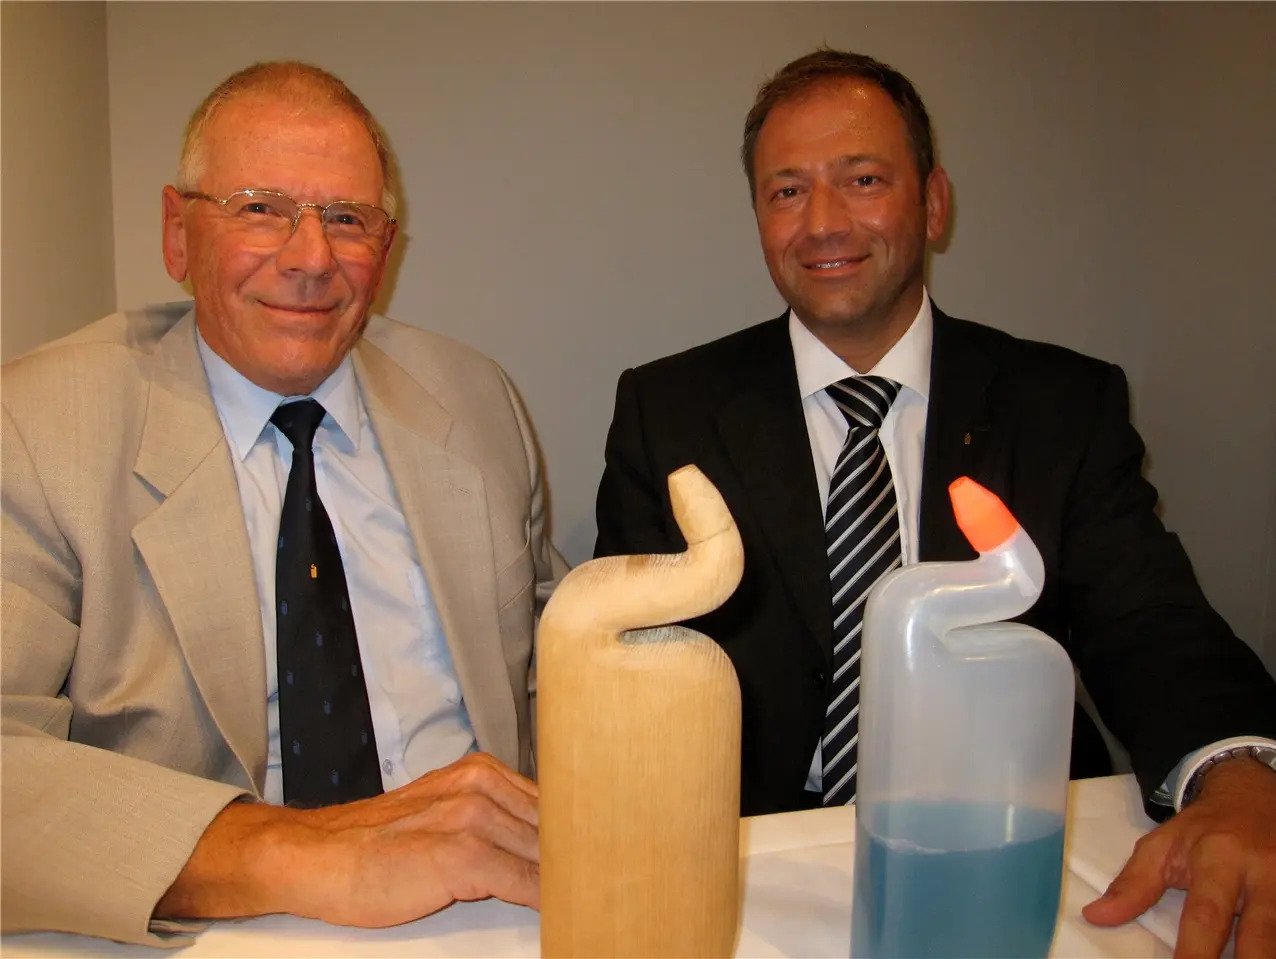 Walter and Heinz During pose with toilet duck prototype